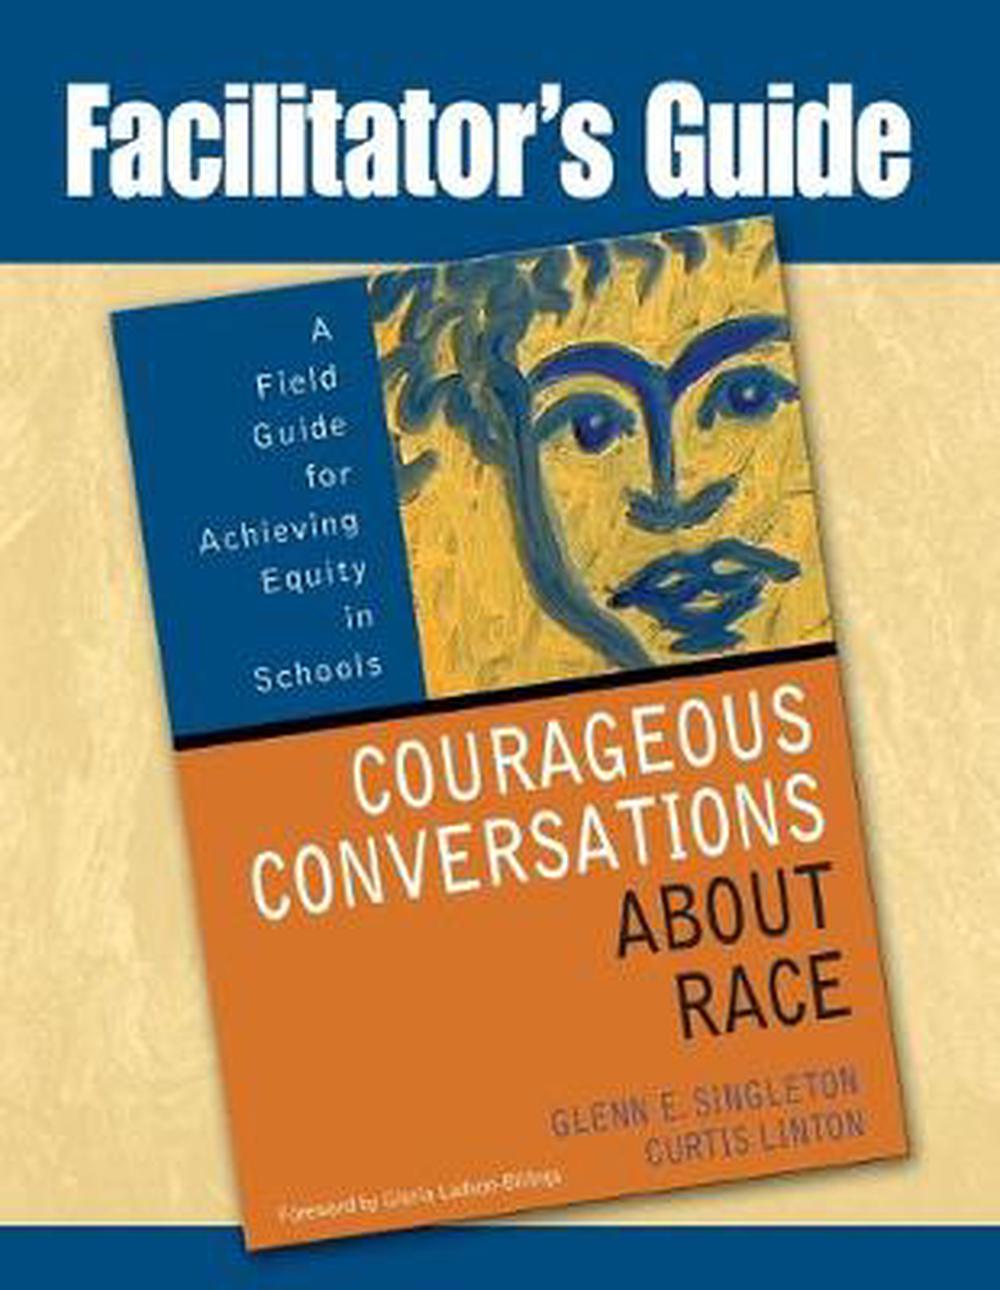 facilitator-s-guide-to-courageous-conversations-about-race-a-field-guide-for-ac-9781412941563